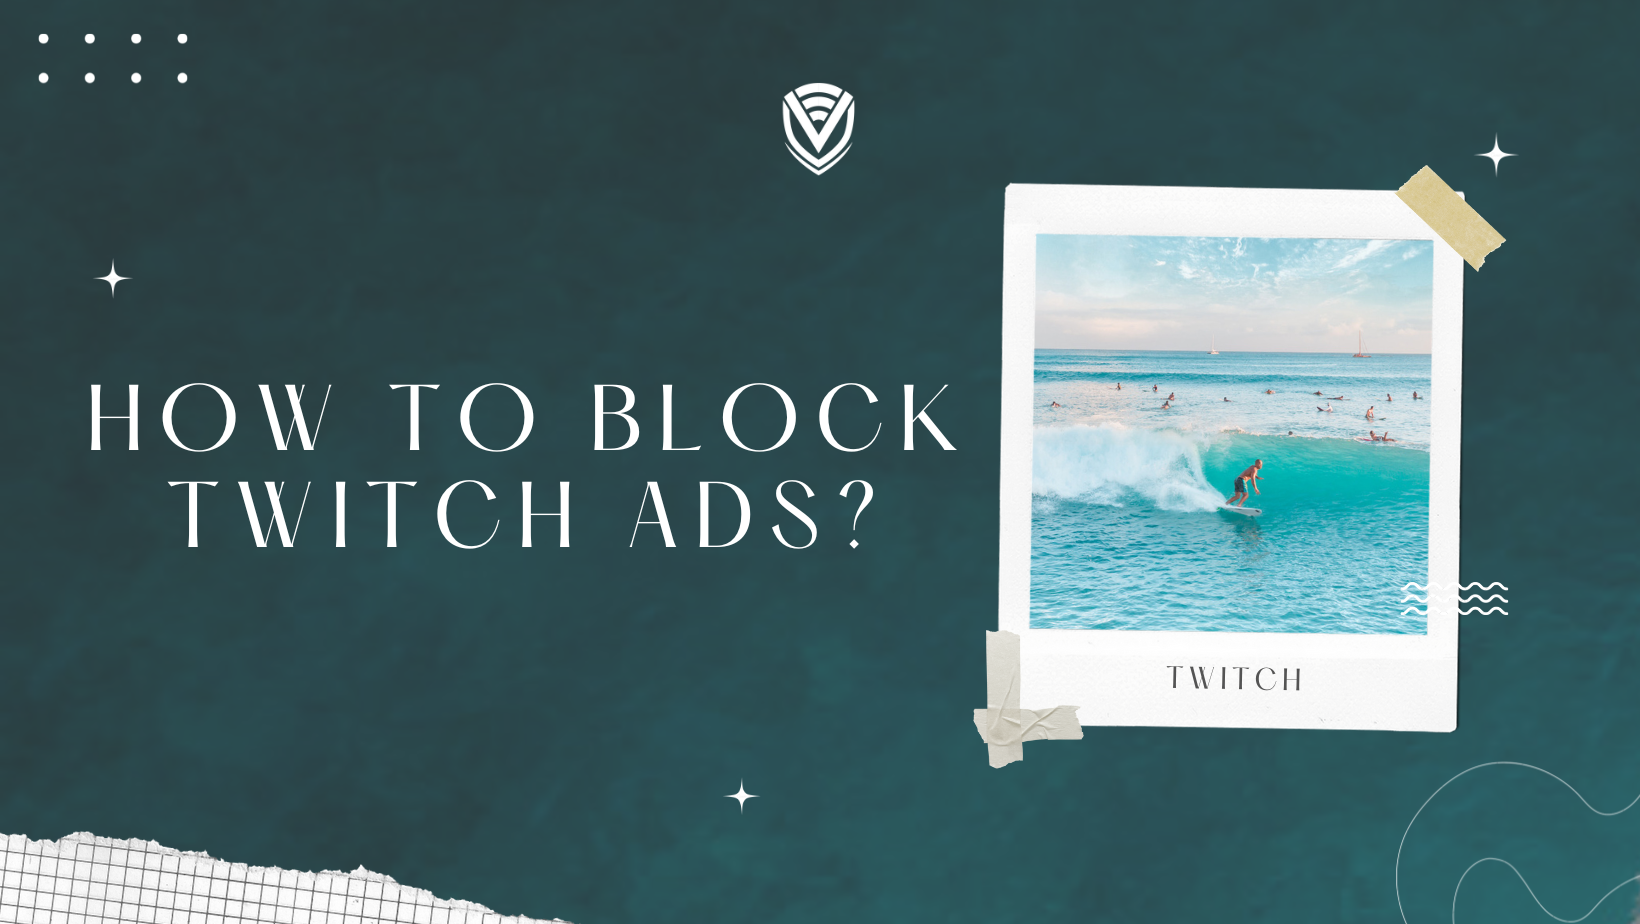 How to block Twitch ads?